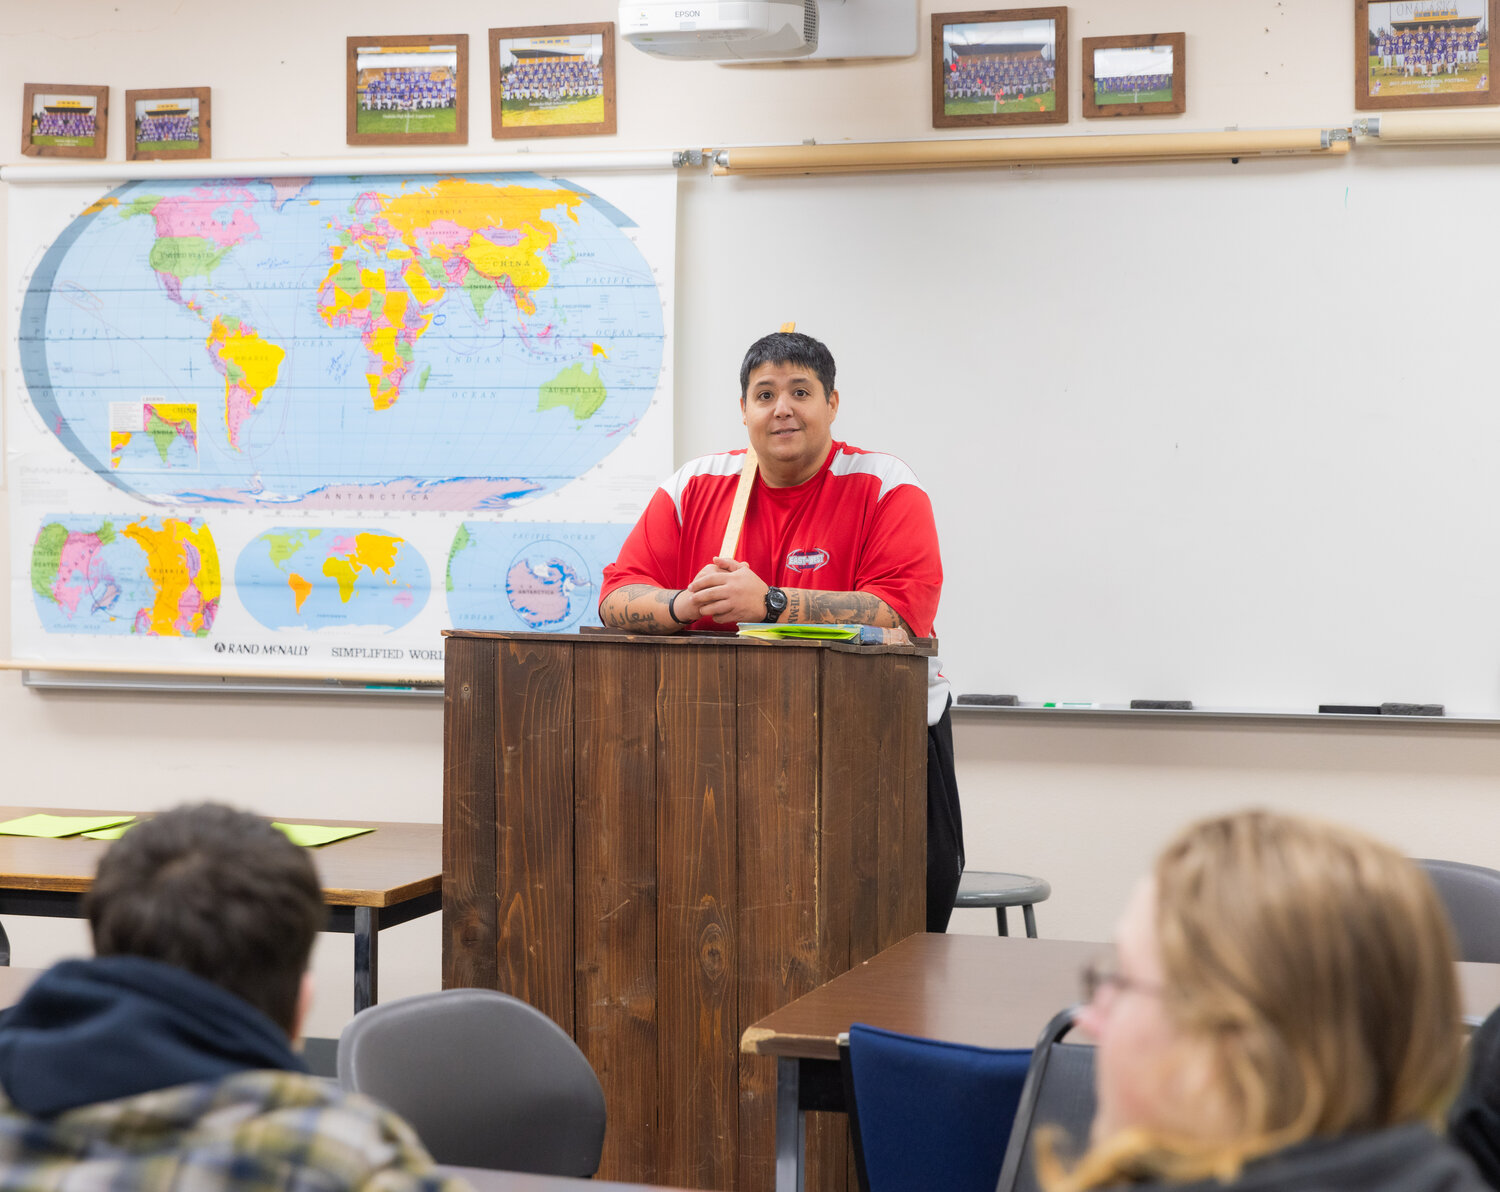 Mazen Saade, a history teacher, smiles while educating students from a podium at Onalaska High School on Tuesday, Nov. 28.